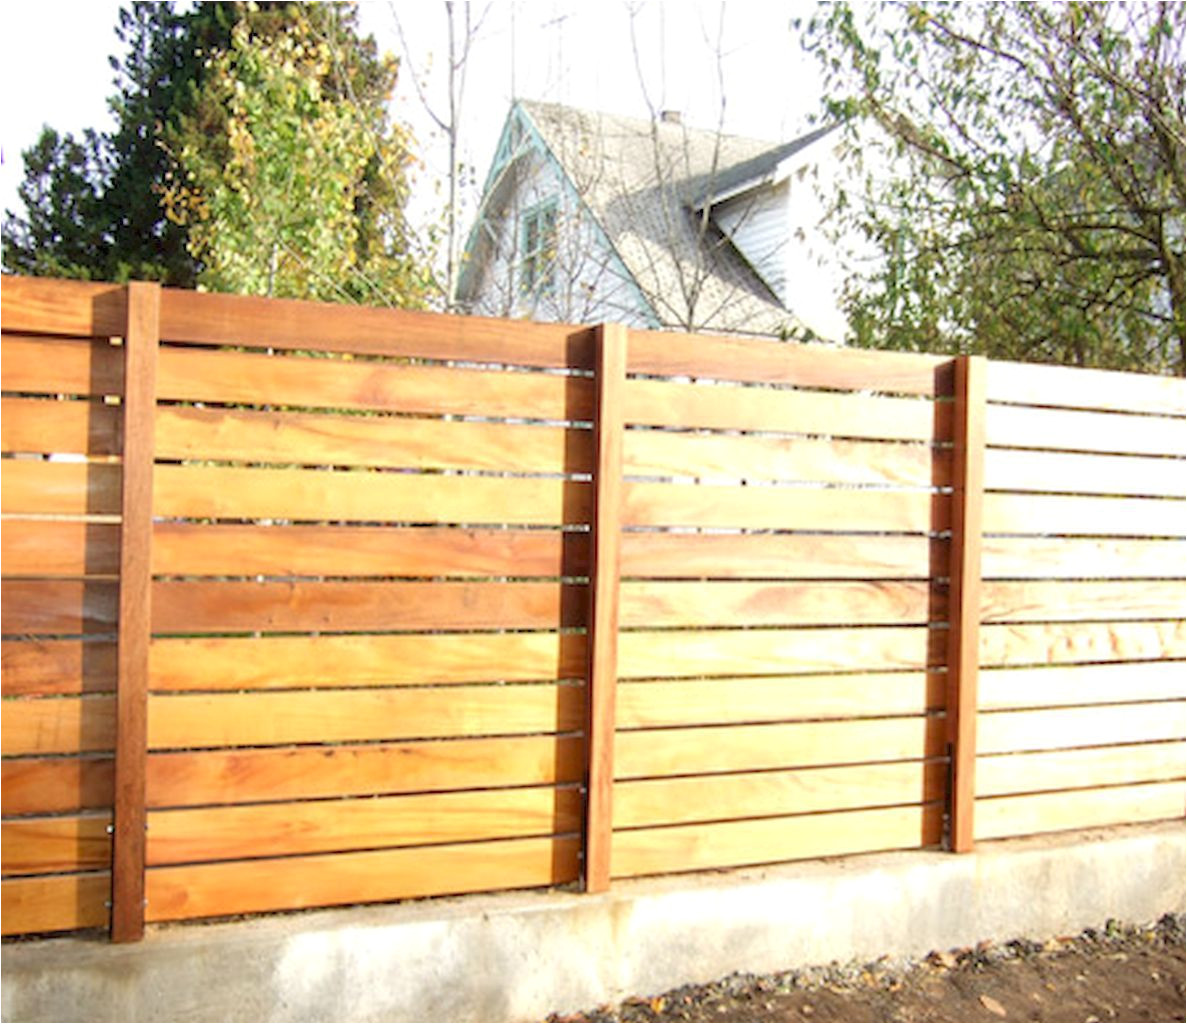 affordable backyard privacy fence design ideas 35